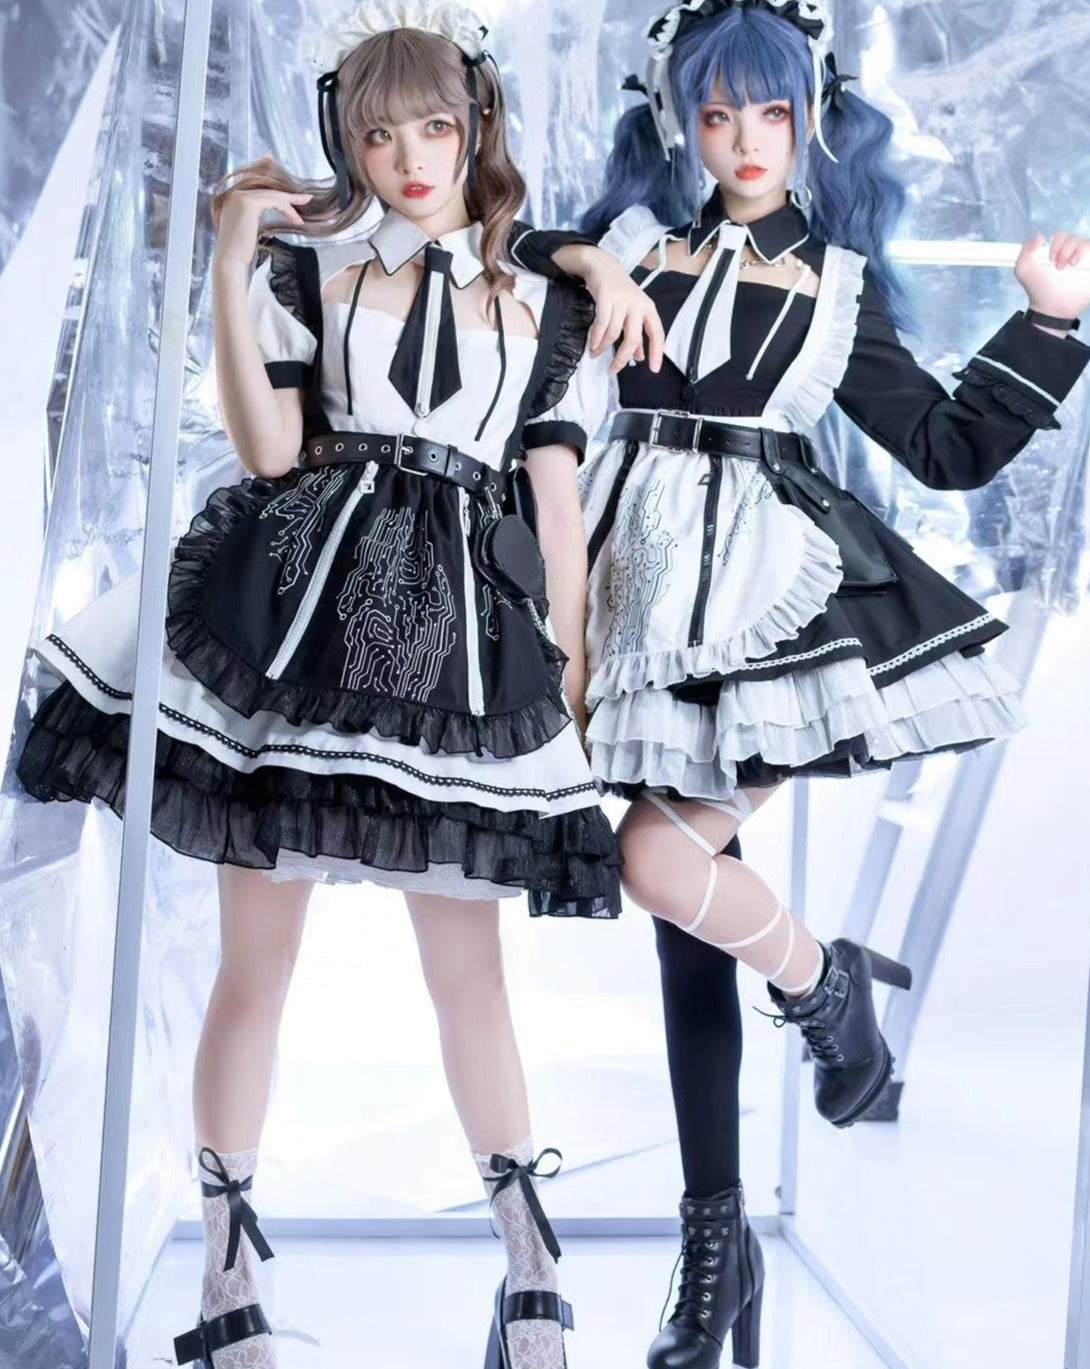 Sci-Fi Maid Long-sleeved Dress with Gothic Lolita Apron